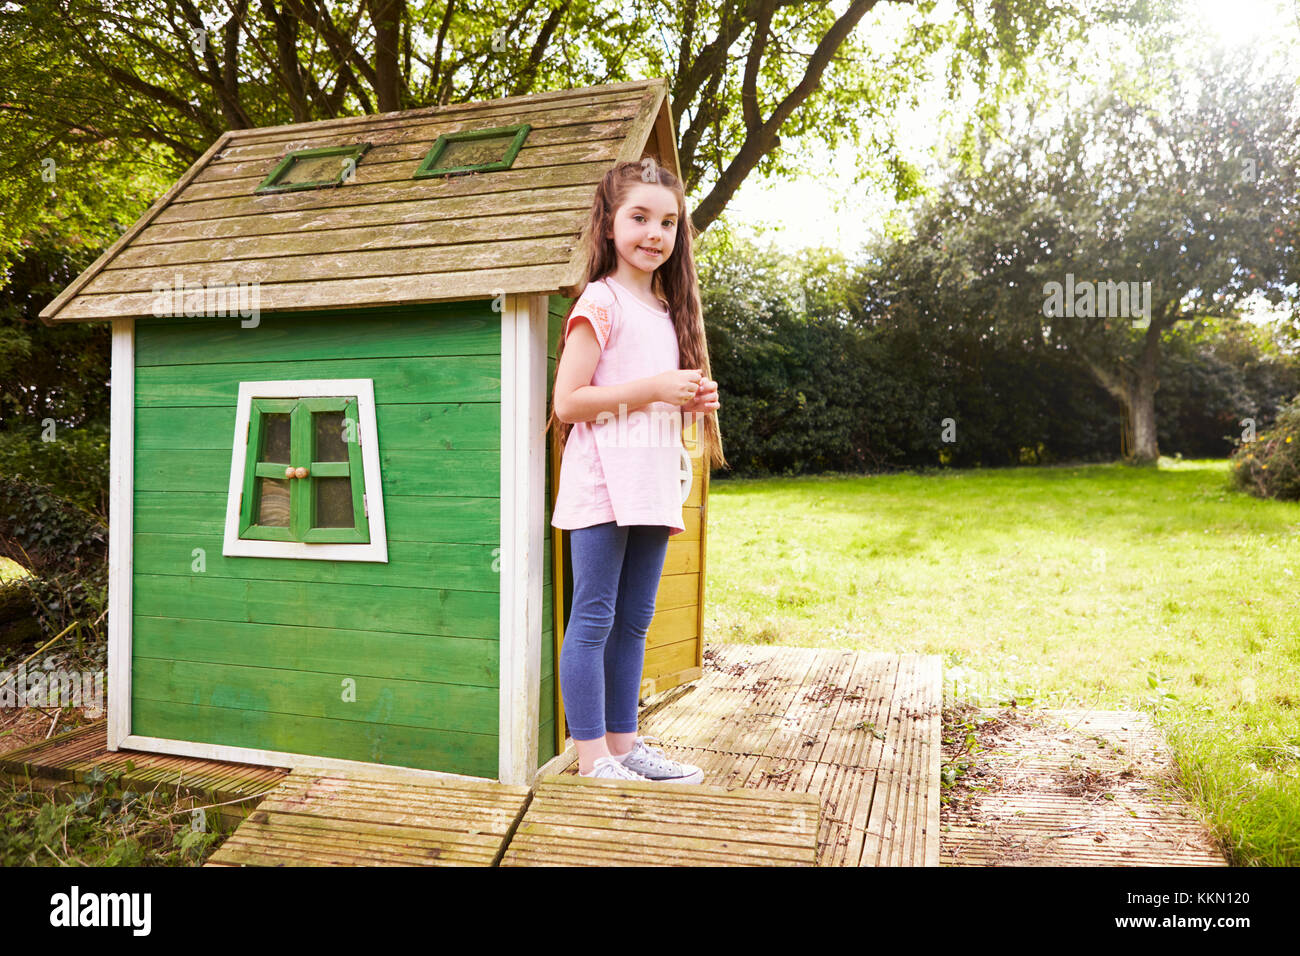 Portrait Of Girl Standing In Garden Next To Playhouse Stock Photo